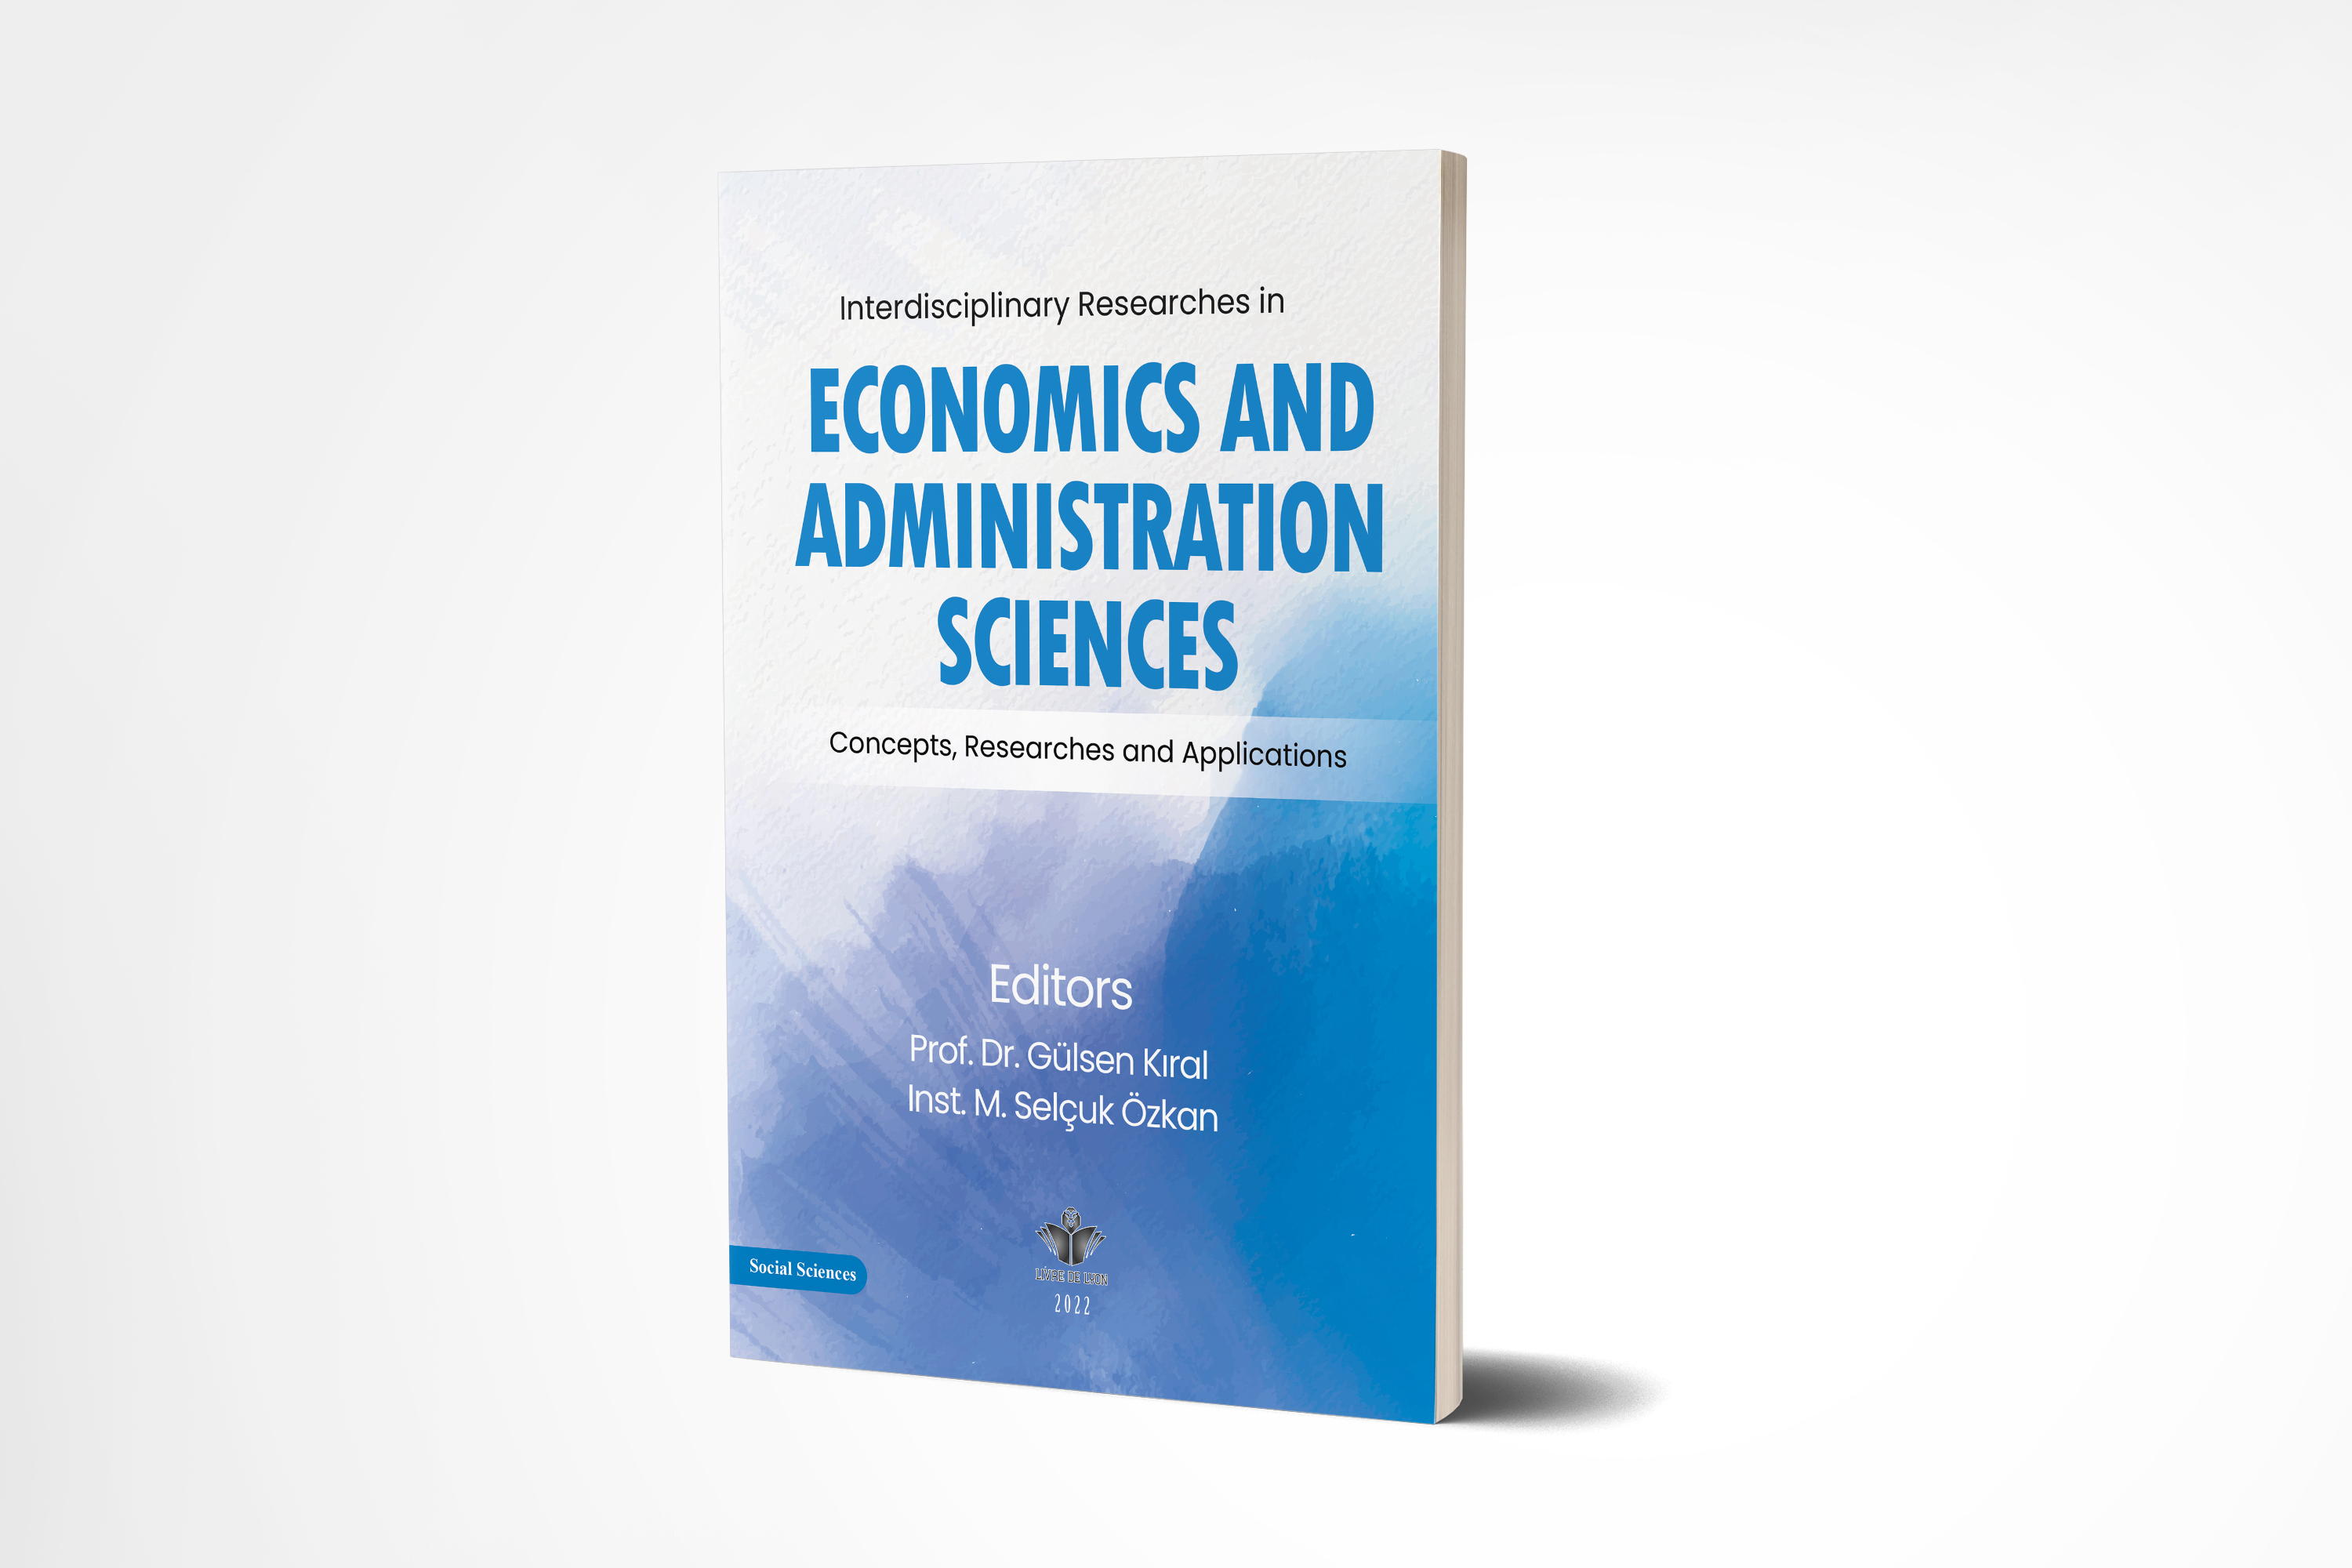 Interdisciplinary Researches in Economics and Administration Sciences: Concepts, Researches and Applications